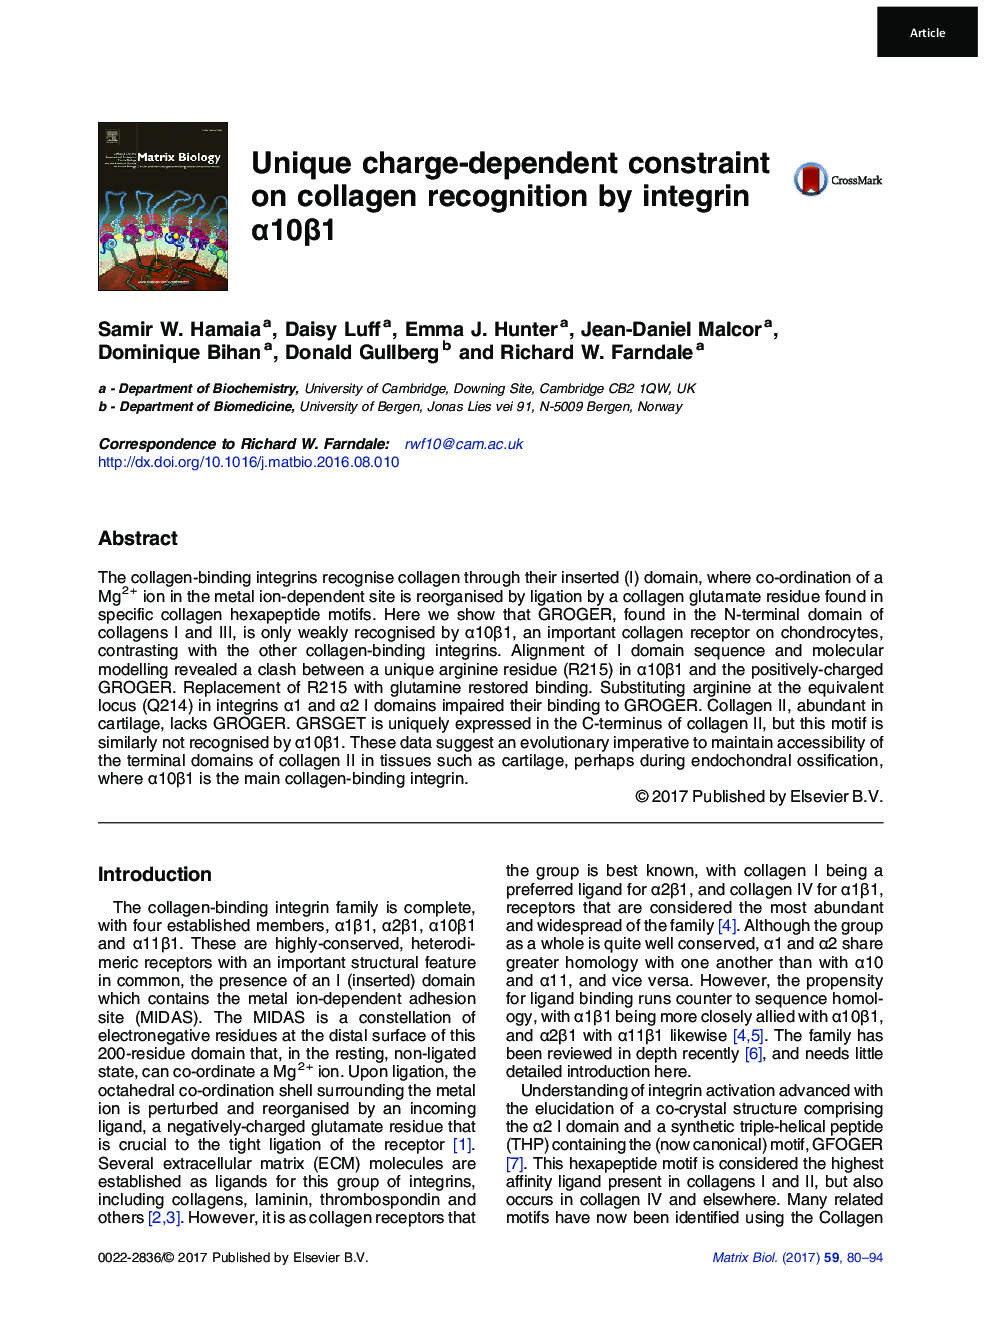 Unique charge-dependent constraint on collagen recognition by integrin Î±10Î²1